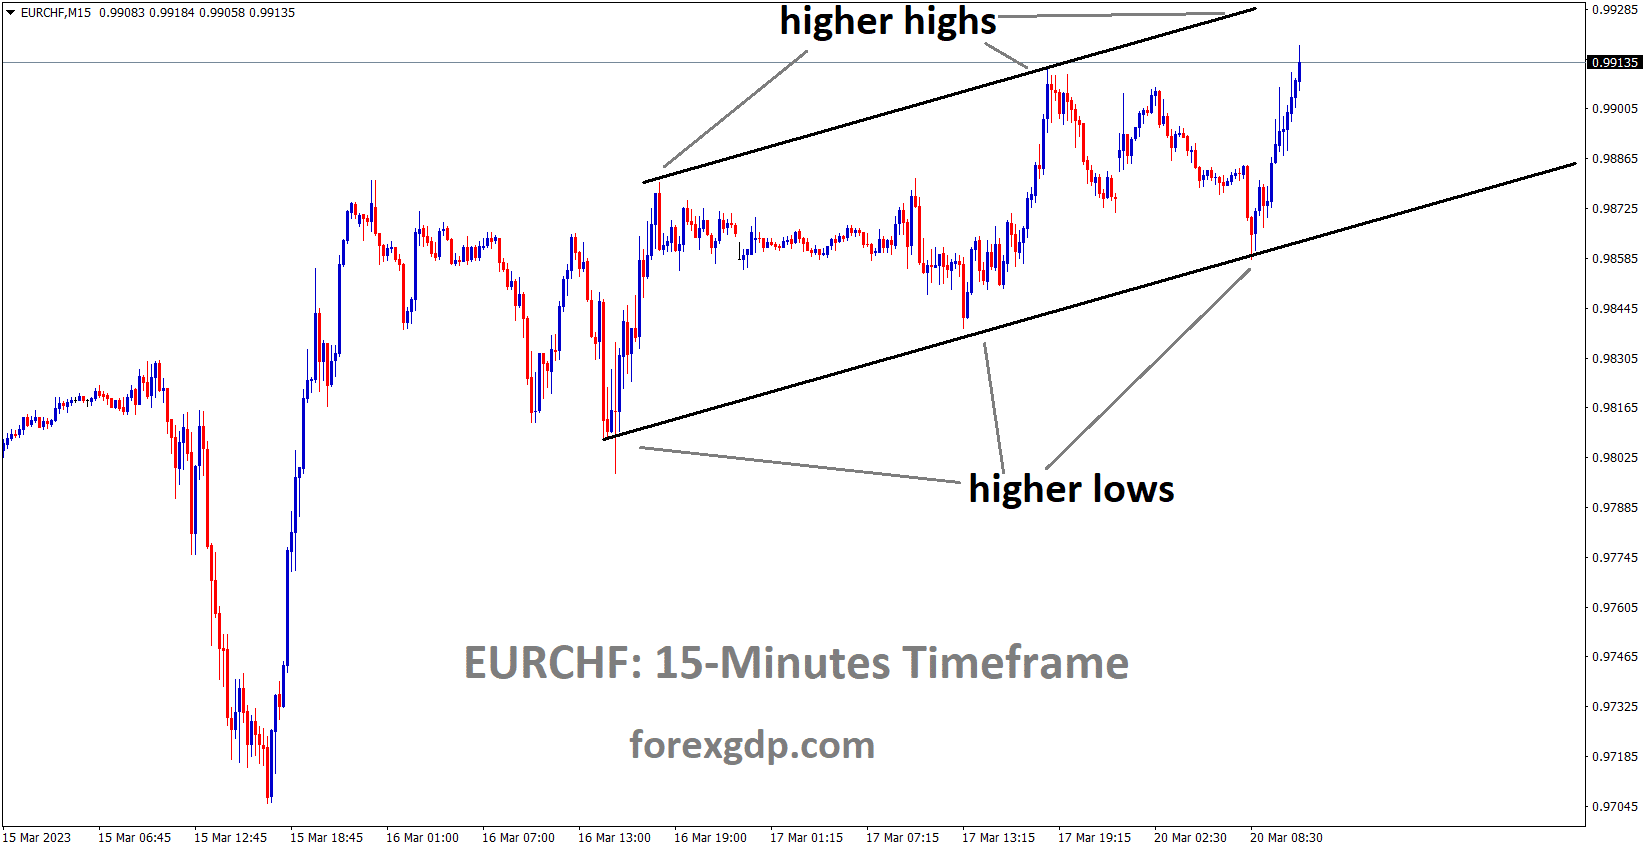 EURCHF is moving in an Ascending channel and the market has rebounded from the higher low area of the channel